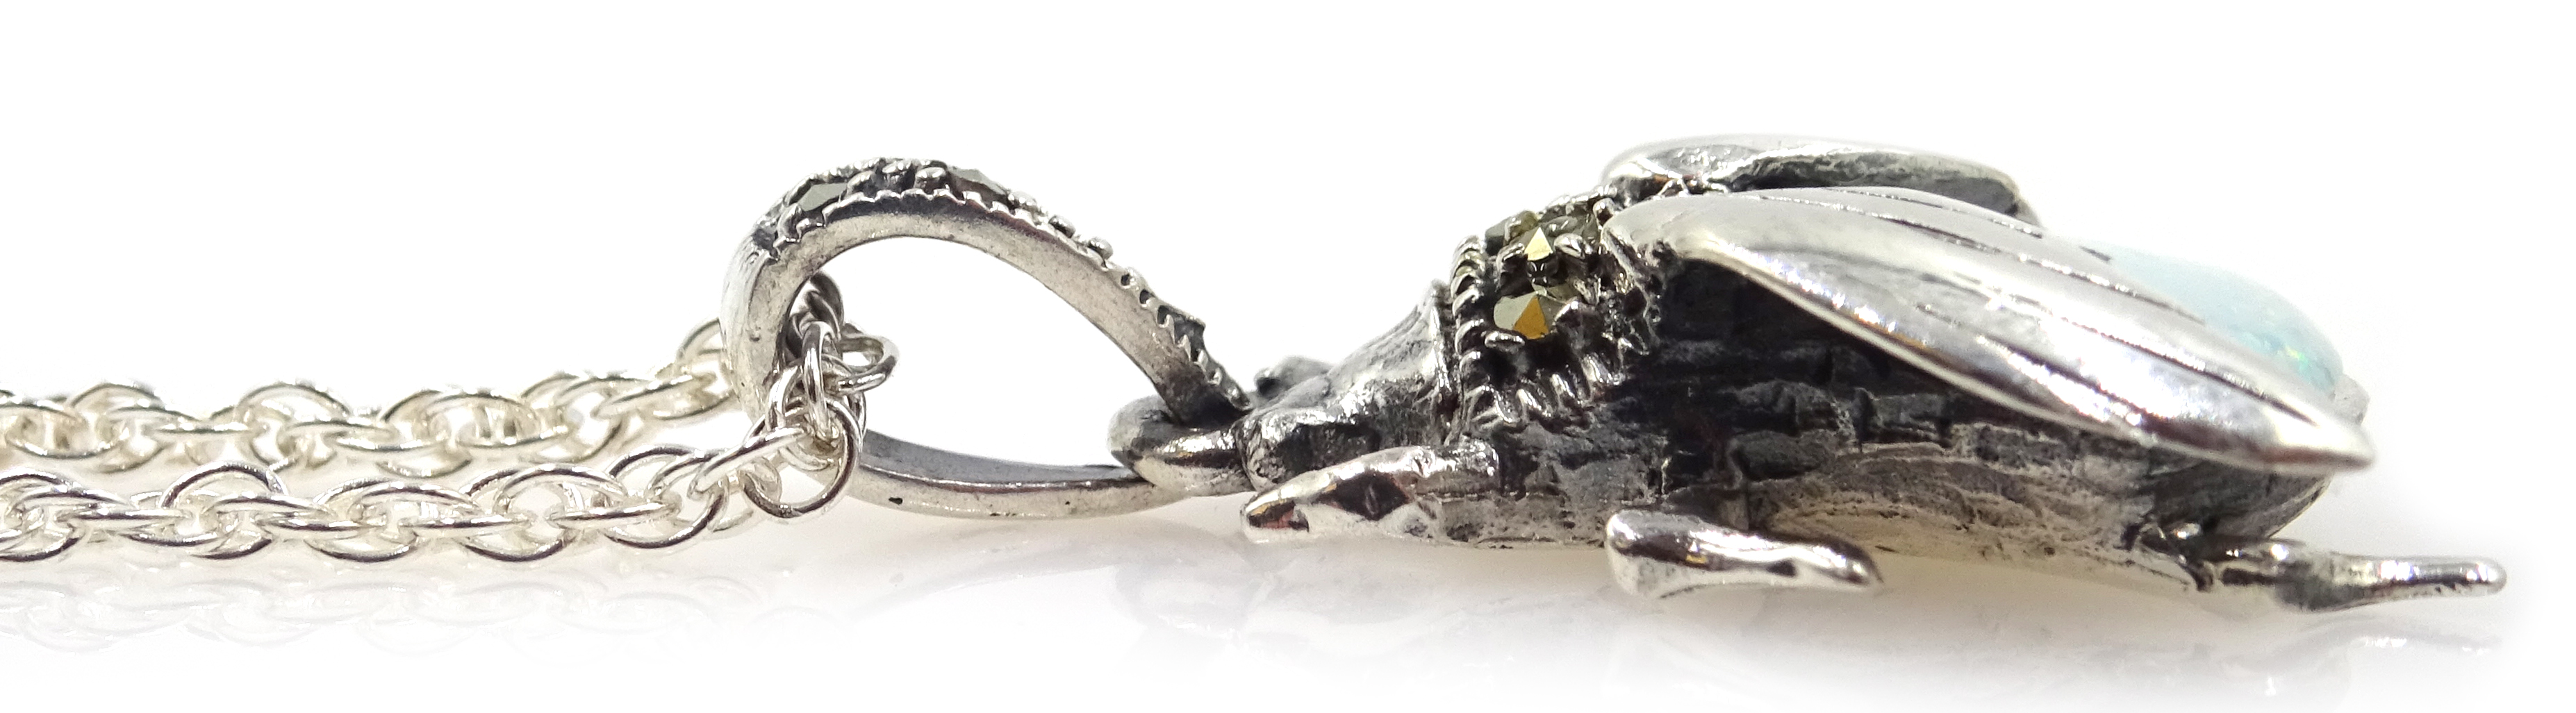 Silver opal and marcasite bug pendant necklace, - Image 2 of 2